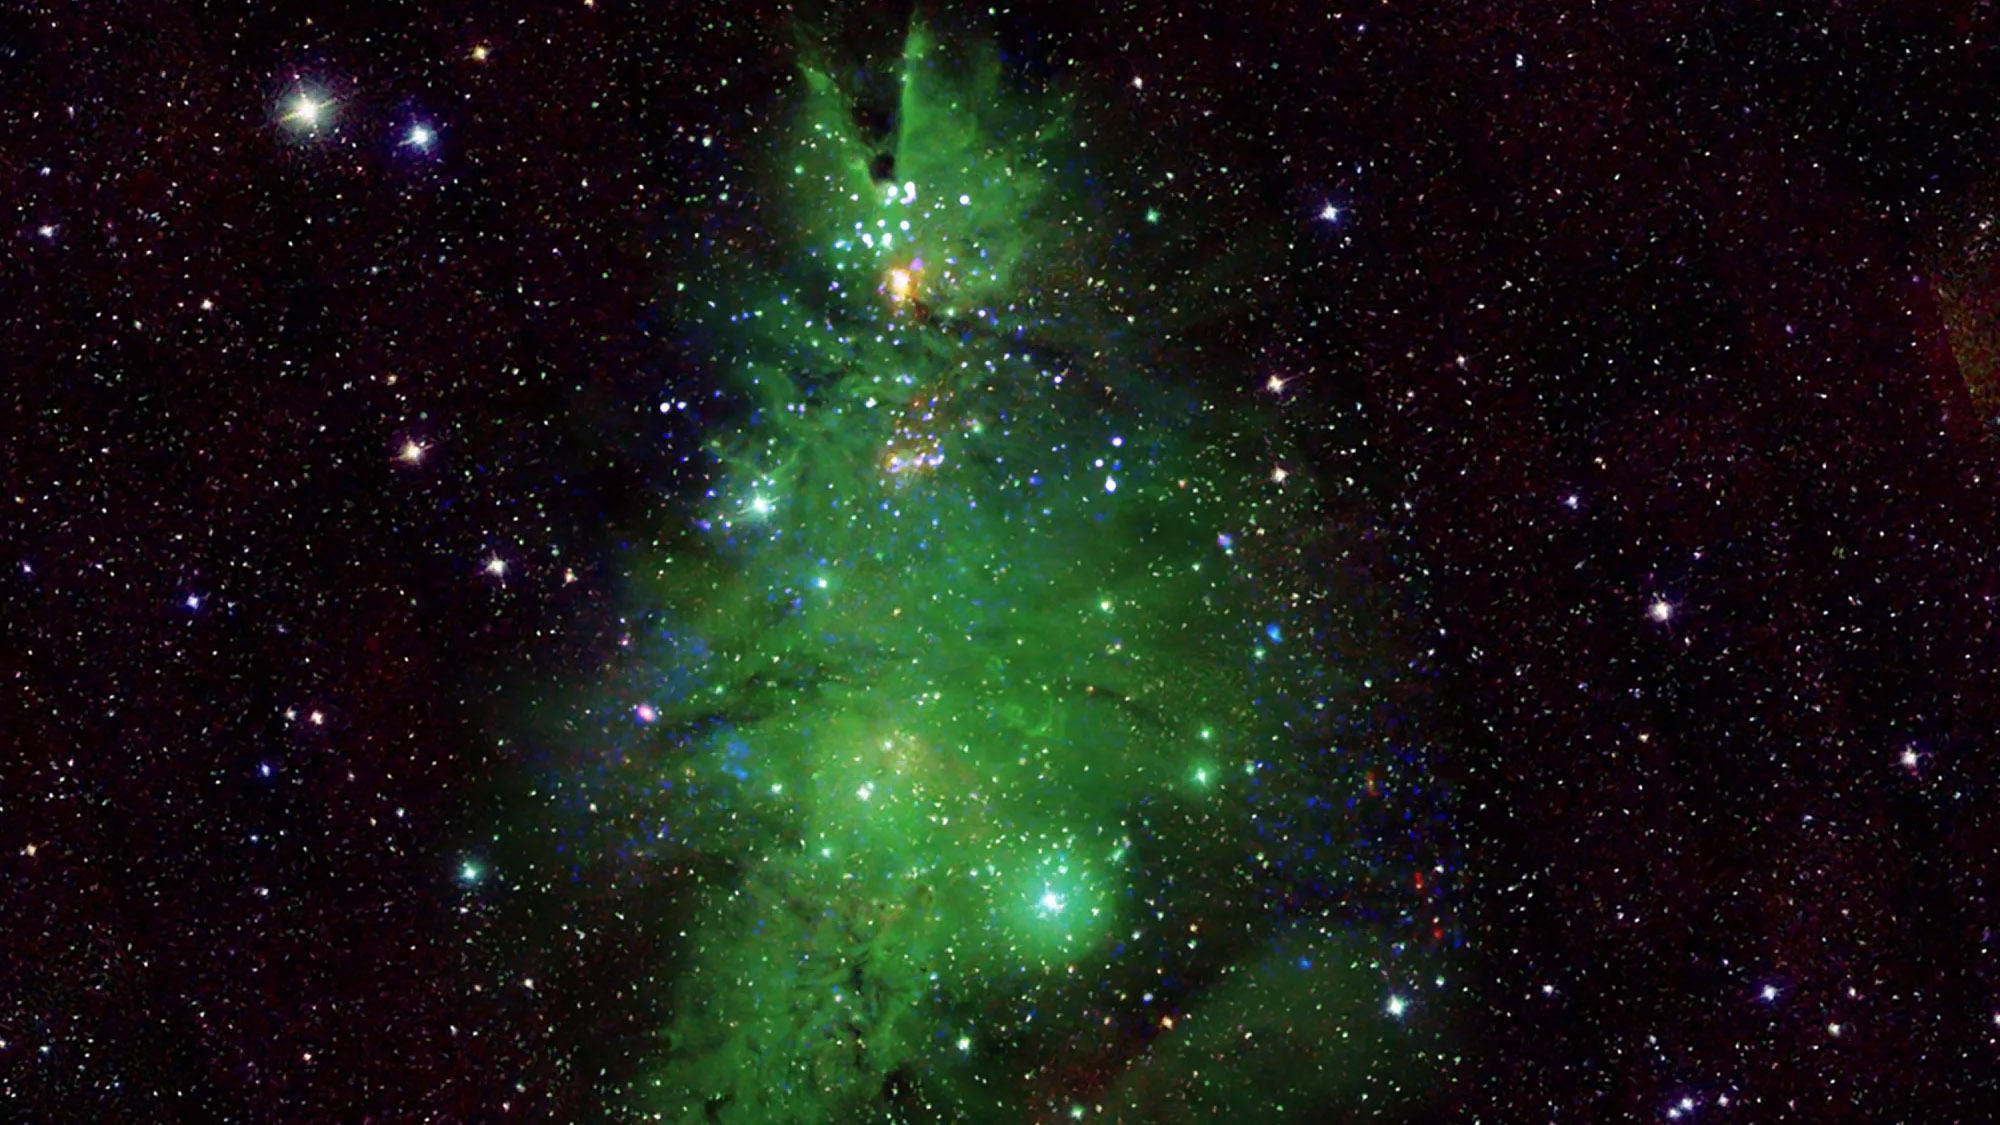 NASA telescope captures photo of ‘Christmas Tree Cluster’ just in time for the holidays